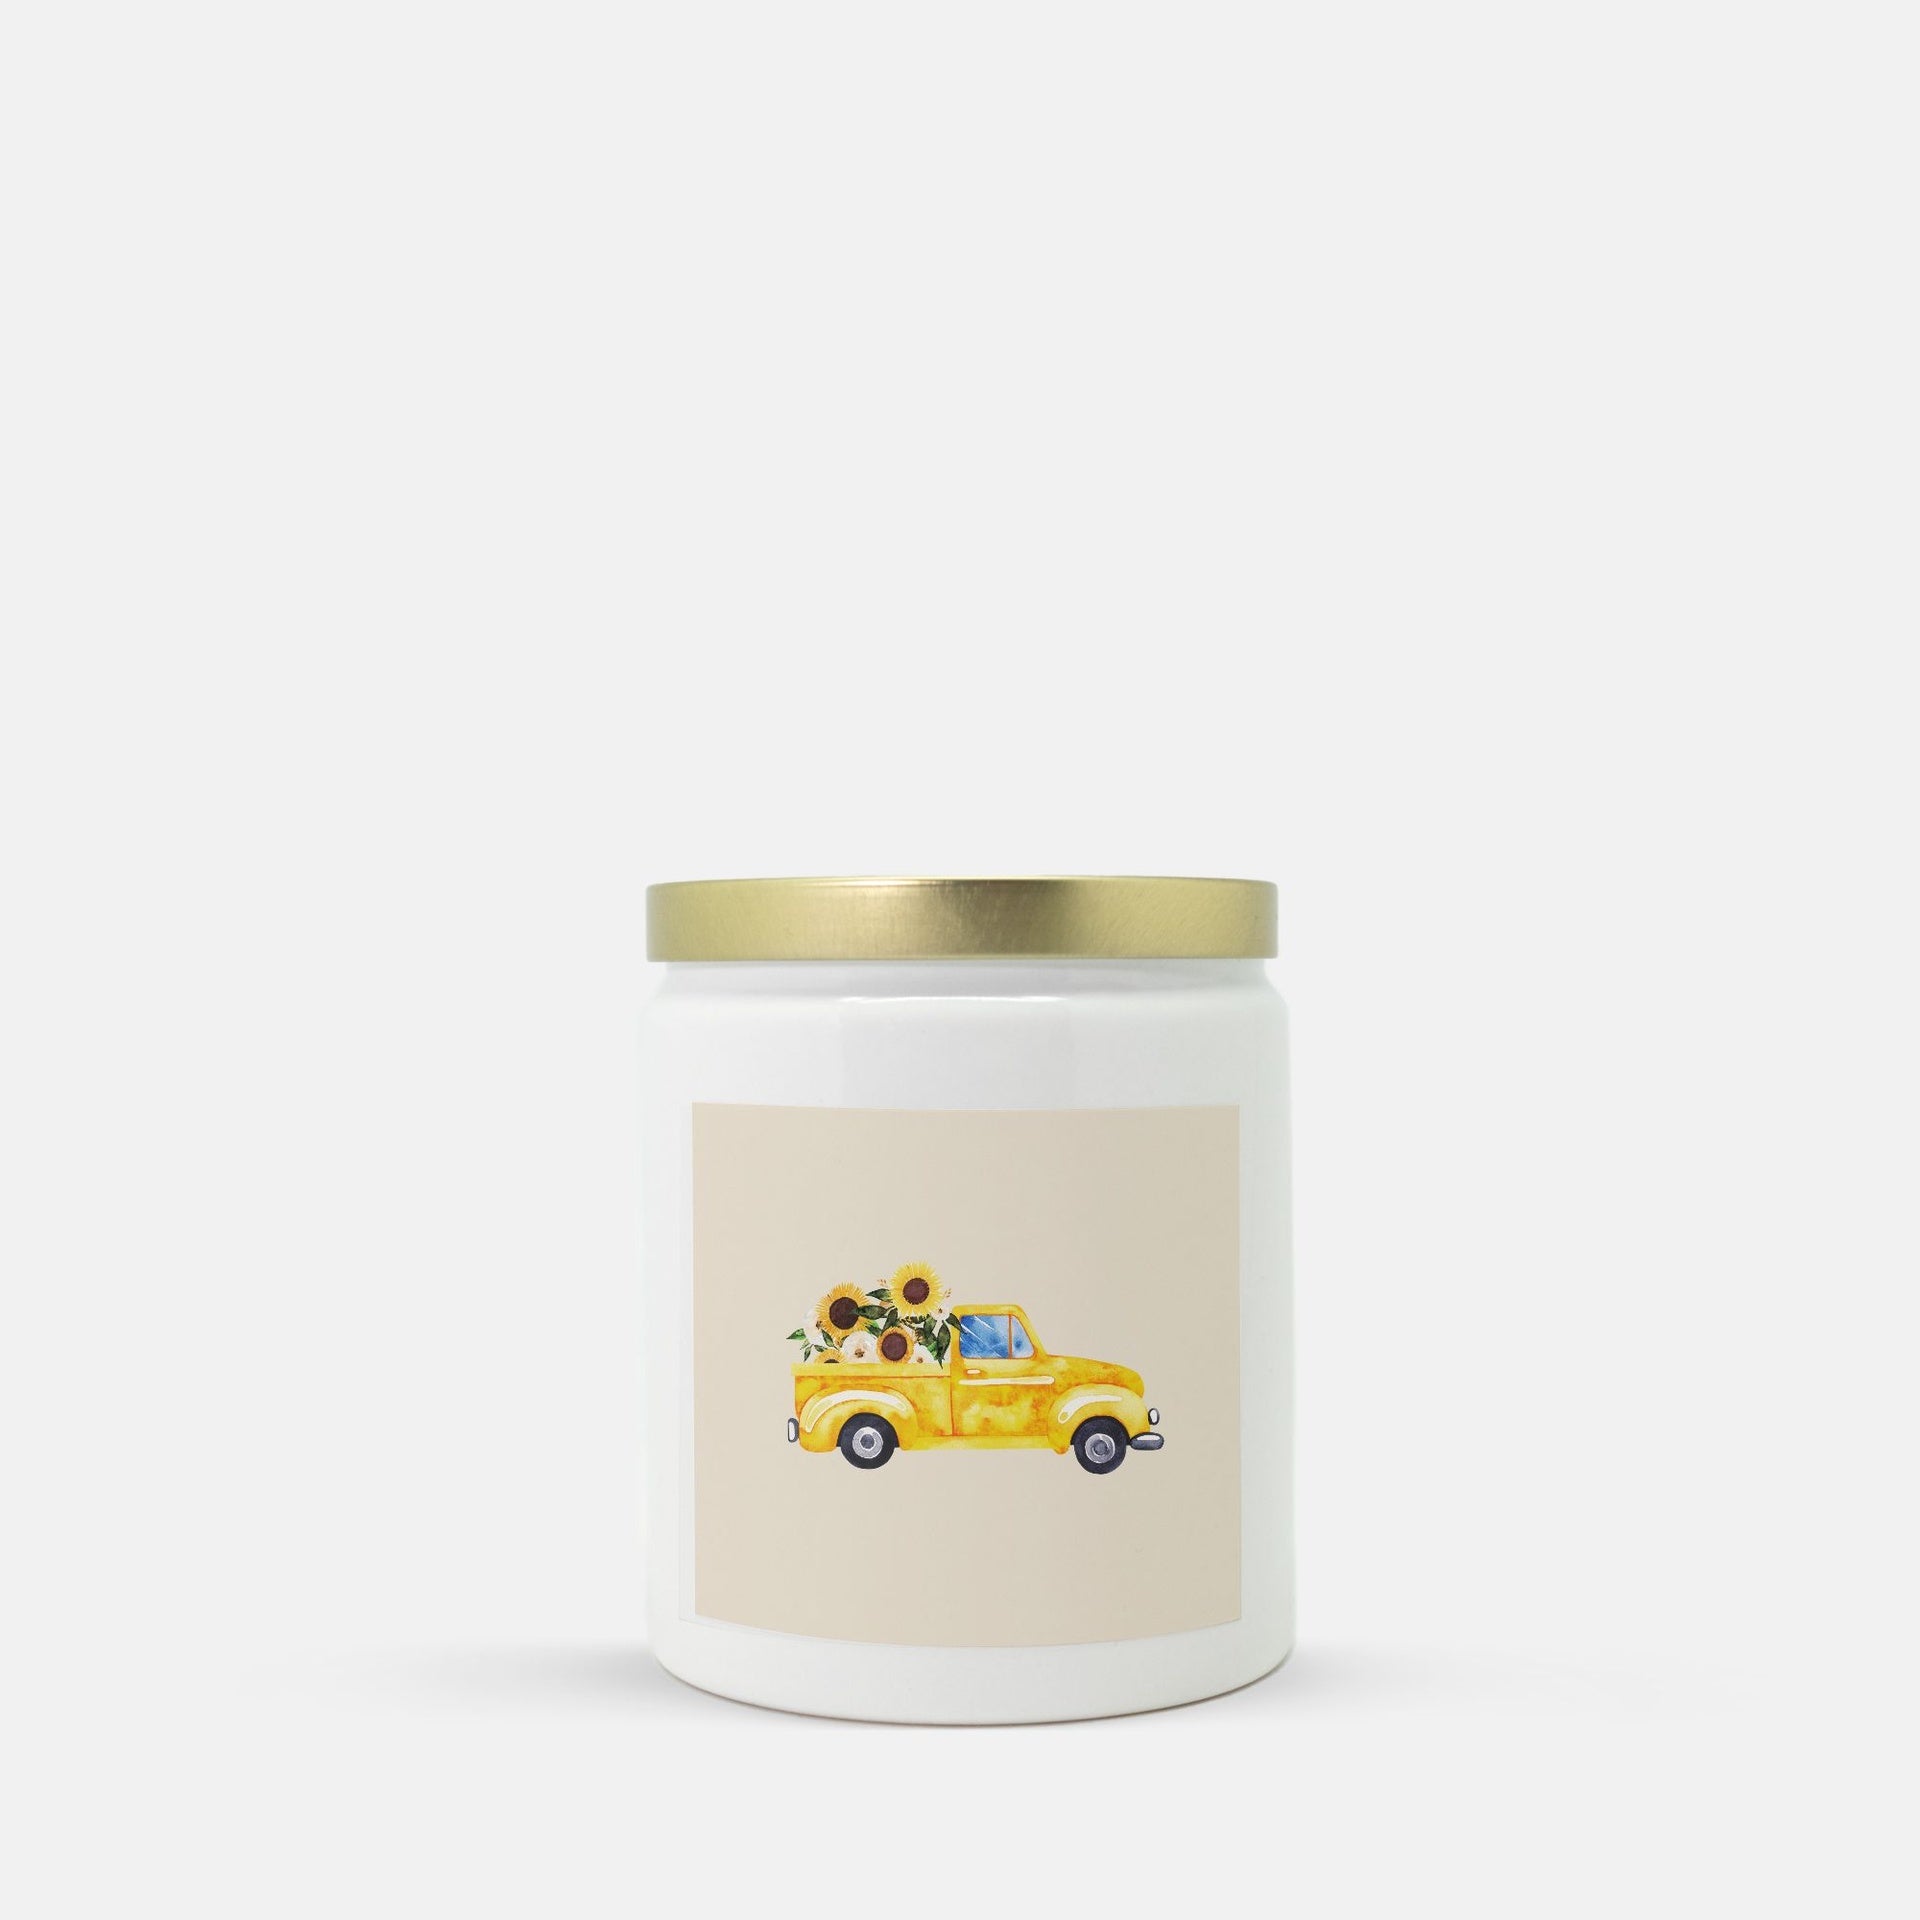 Lifestyle Details - Yellow Rustic Truck Ceramic Candle w Gold Lid - Macintosh